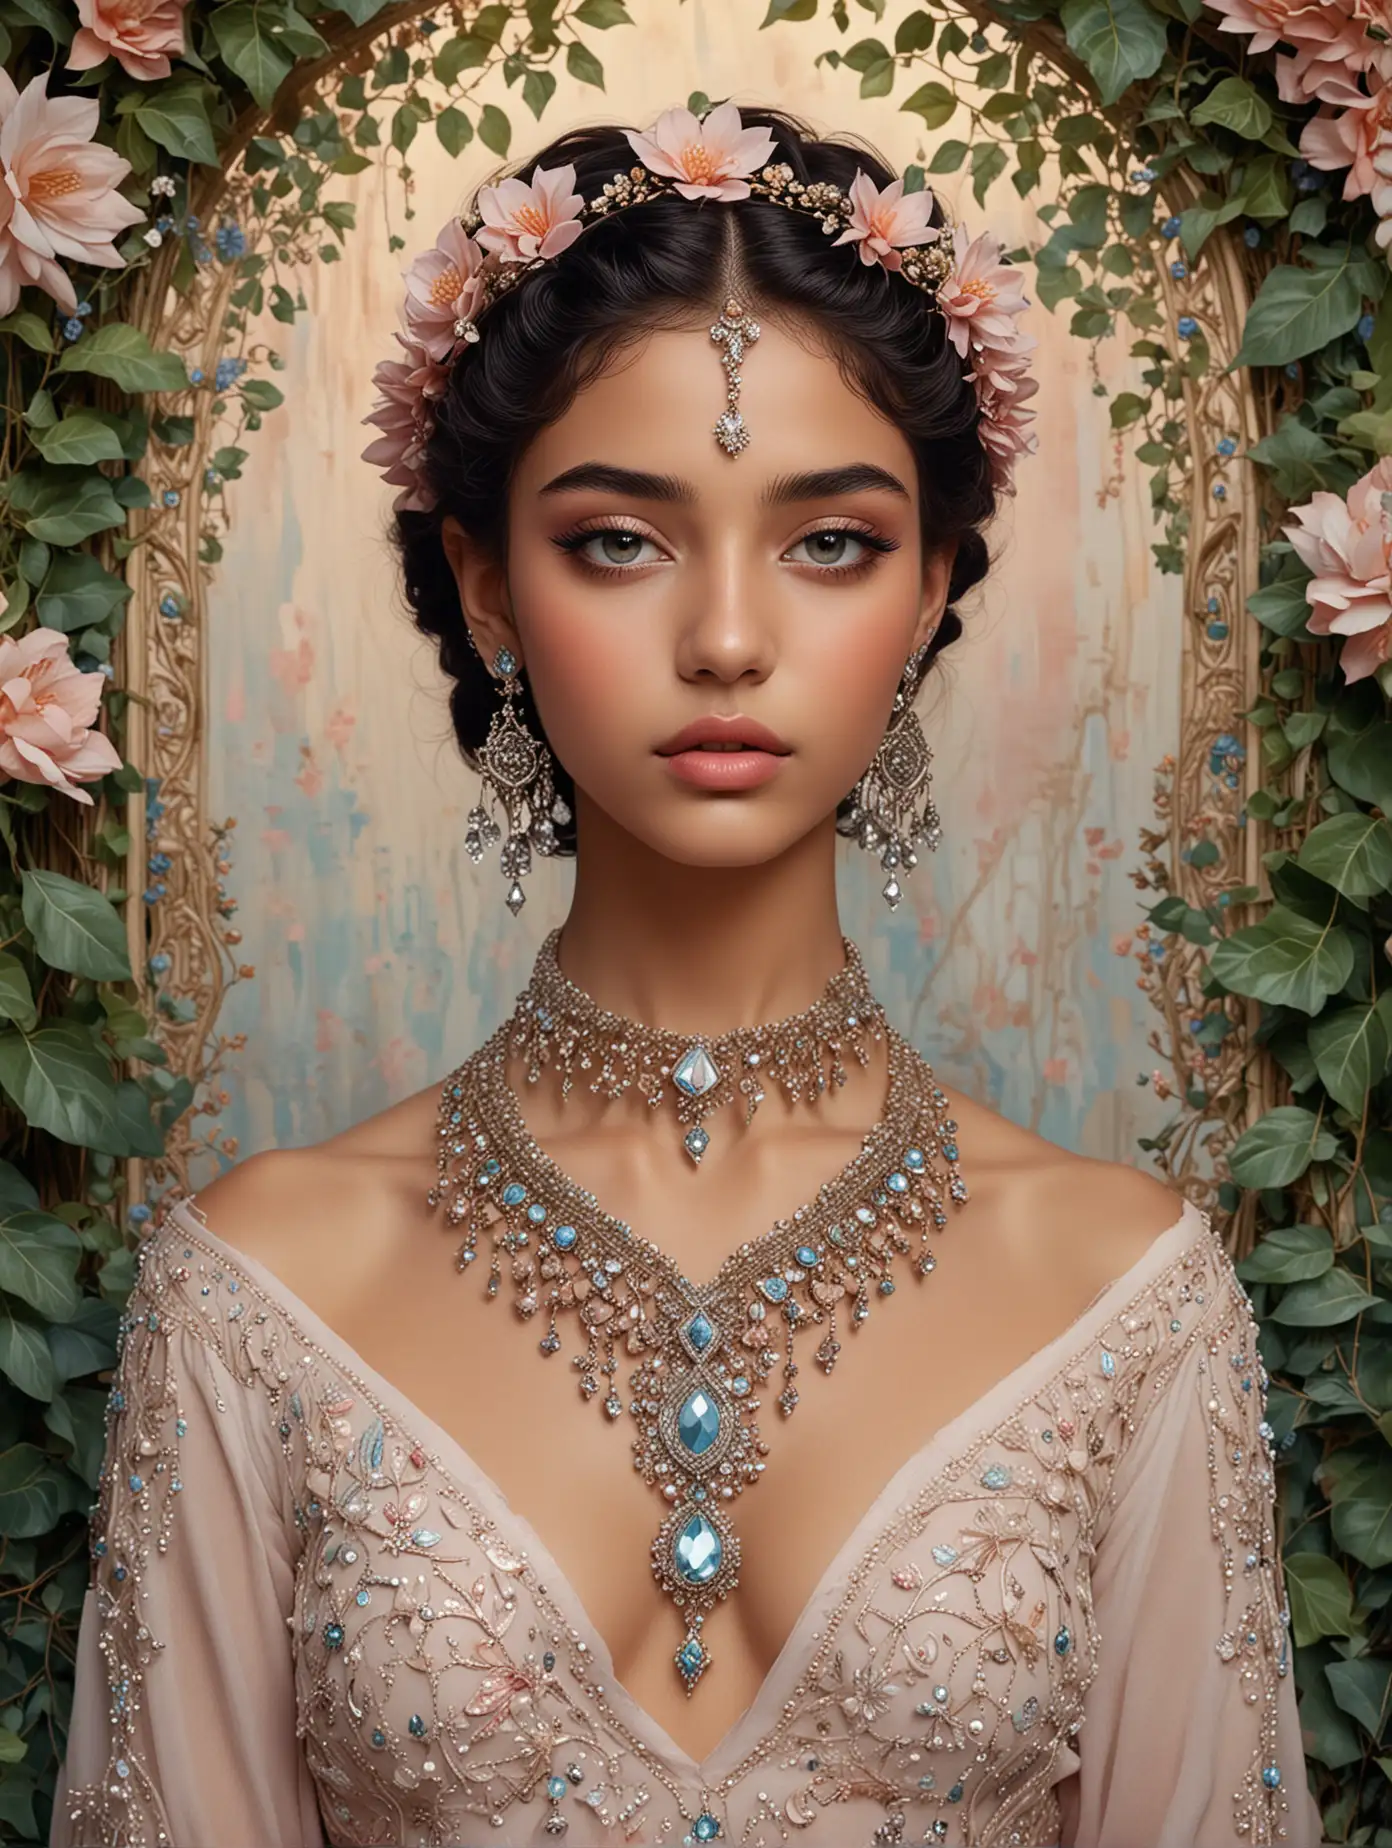 A beautiful nude Arab tribal teen in a diamond painting with pastel colors inspired by [ Dior ] and Gabbana fashion. with a light haze that gives the image an air of mystery. Her exquisite hairstyle is adorned with flowers and intricate shapes create a romantic image. Makeup, necklace and earrings add finishing touches to this full-length composition against a backdrop of ivy